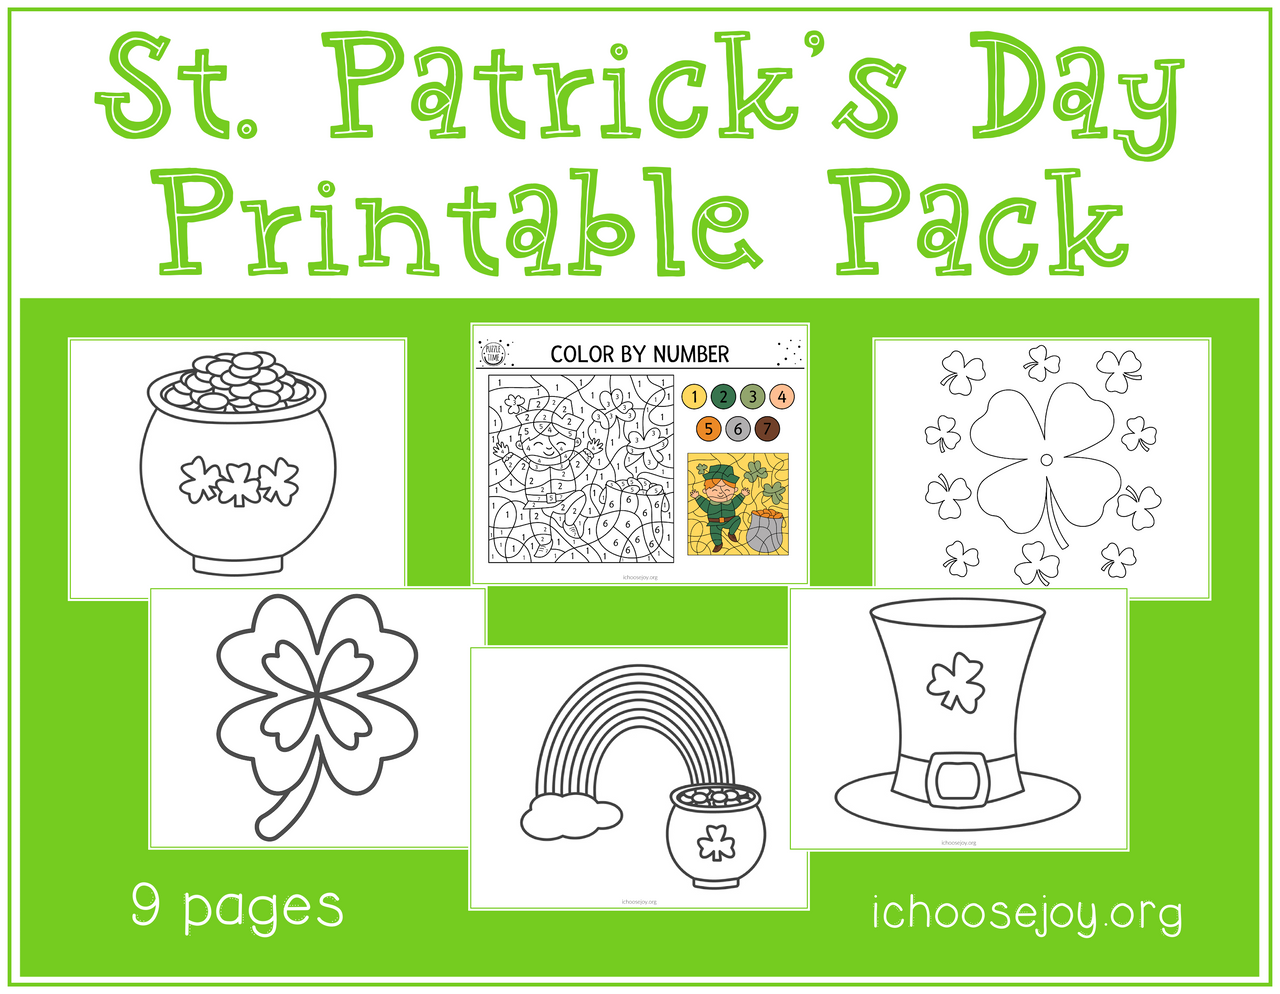 St patricks day printable activity pack coloring or salt painting templates